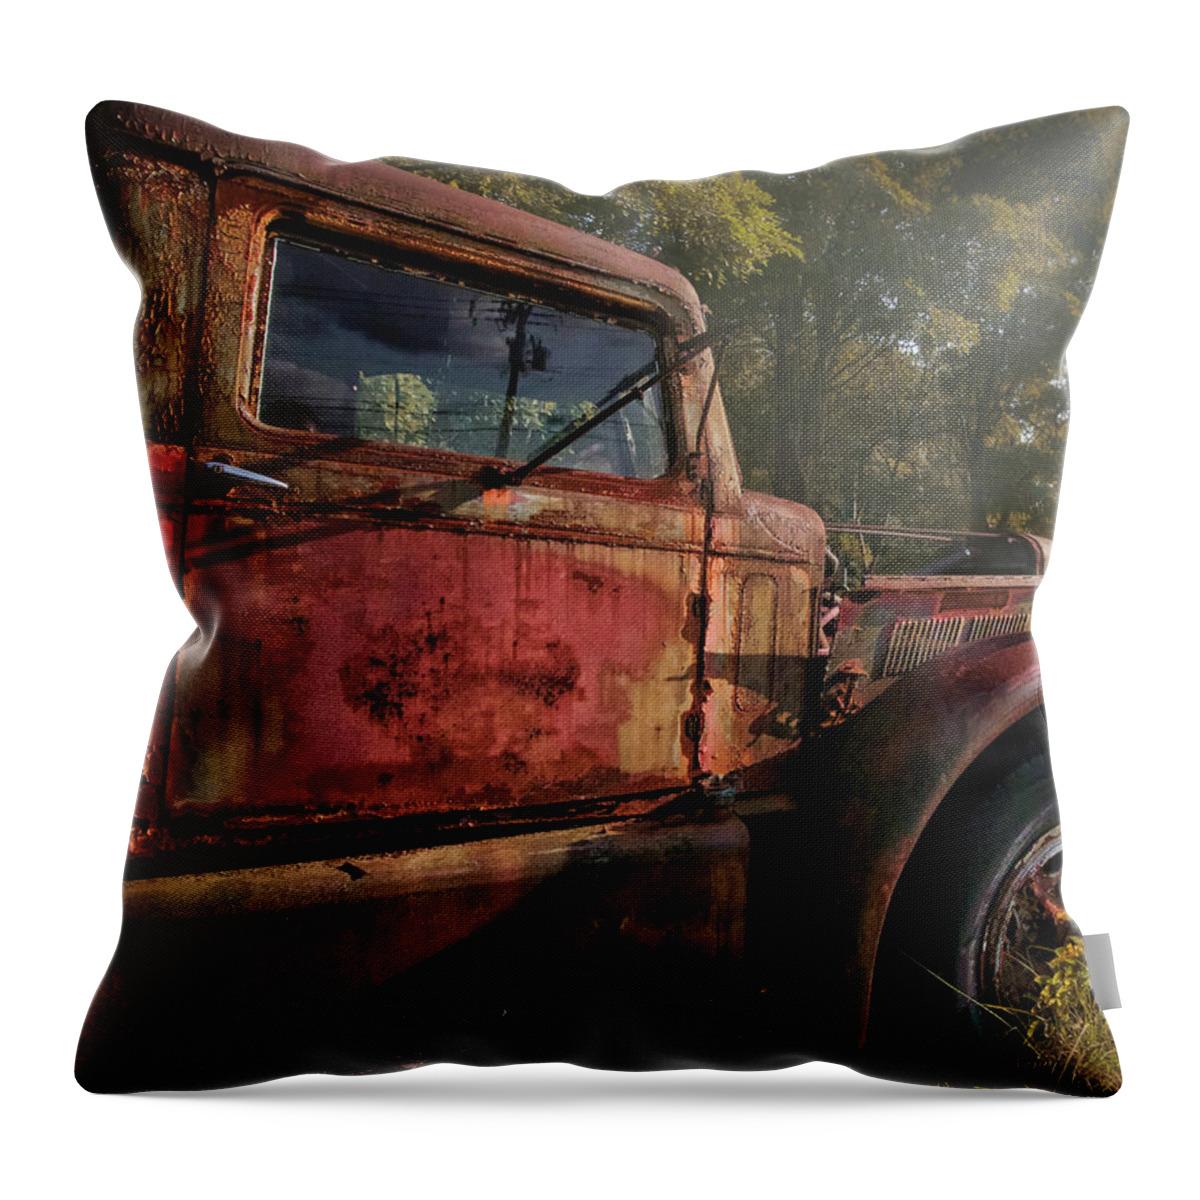 Truck Throw Pillow featuring the photograph Wishful Thinking by Jerry LoFaro